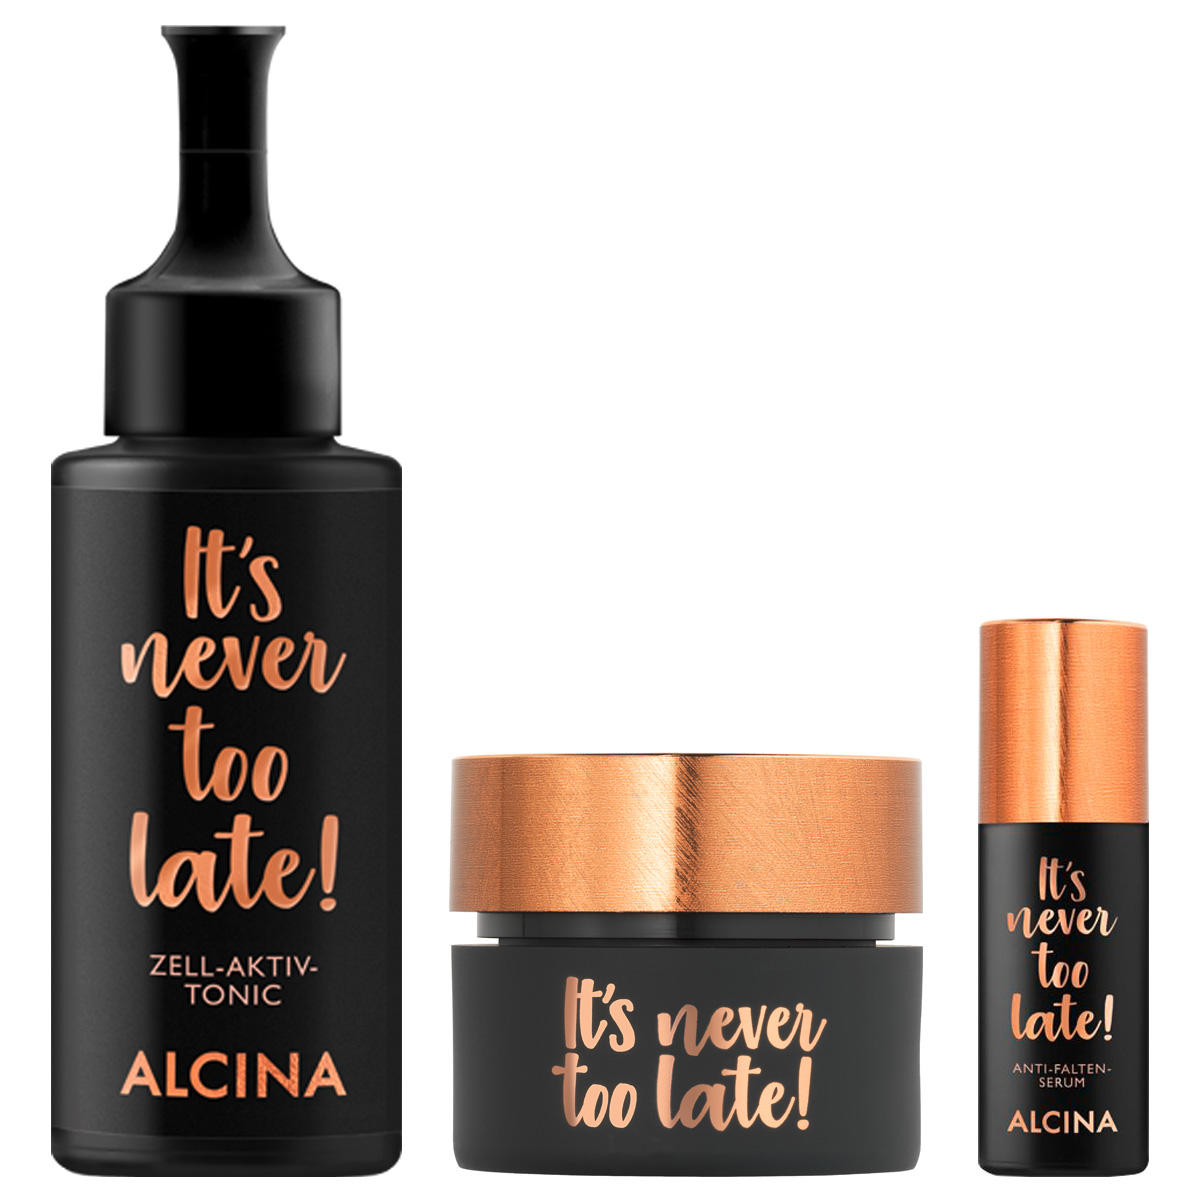 Alcina It's never too late Facecare Set  - 1